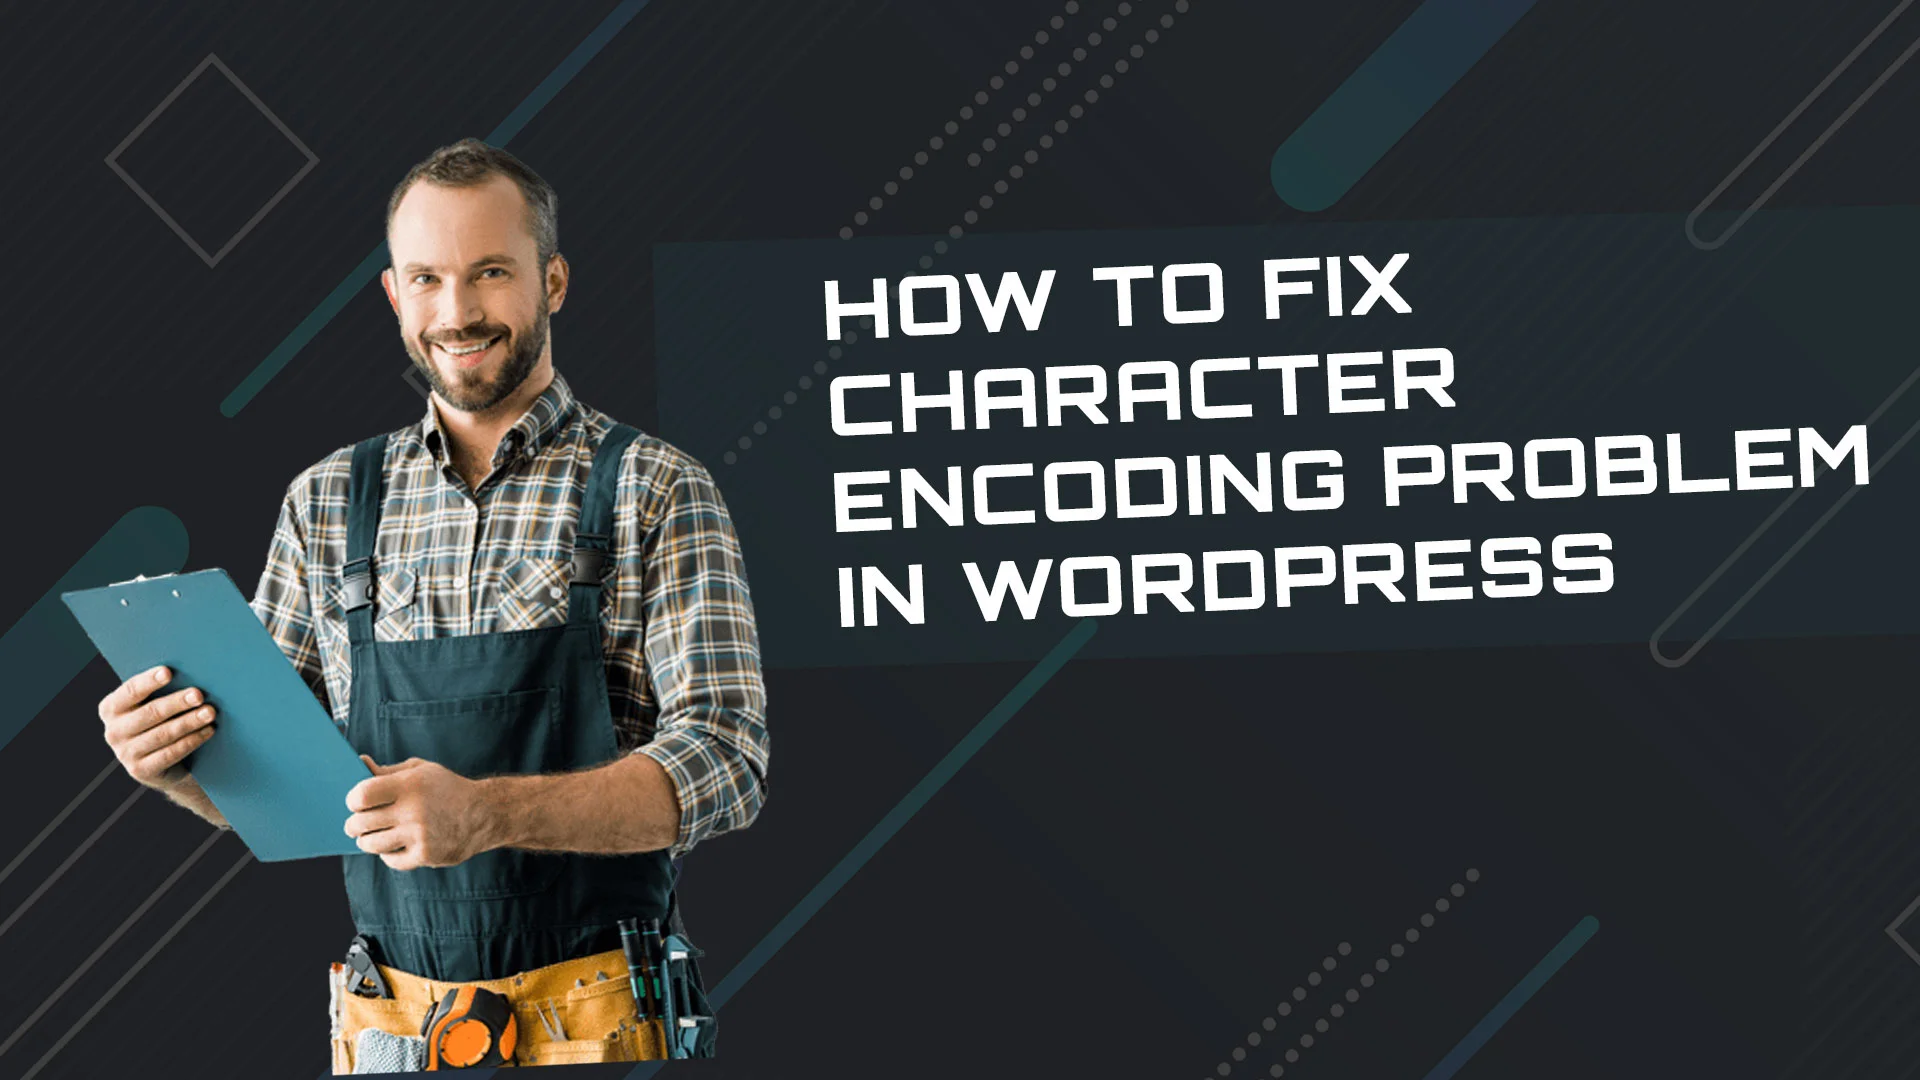 How to Fix Character Encoding Problem in WordPress